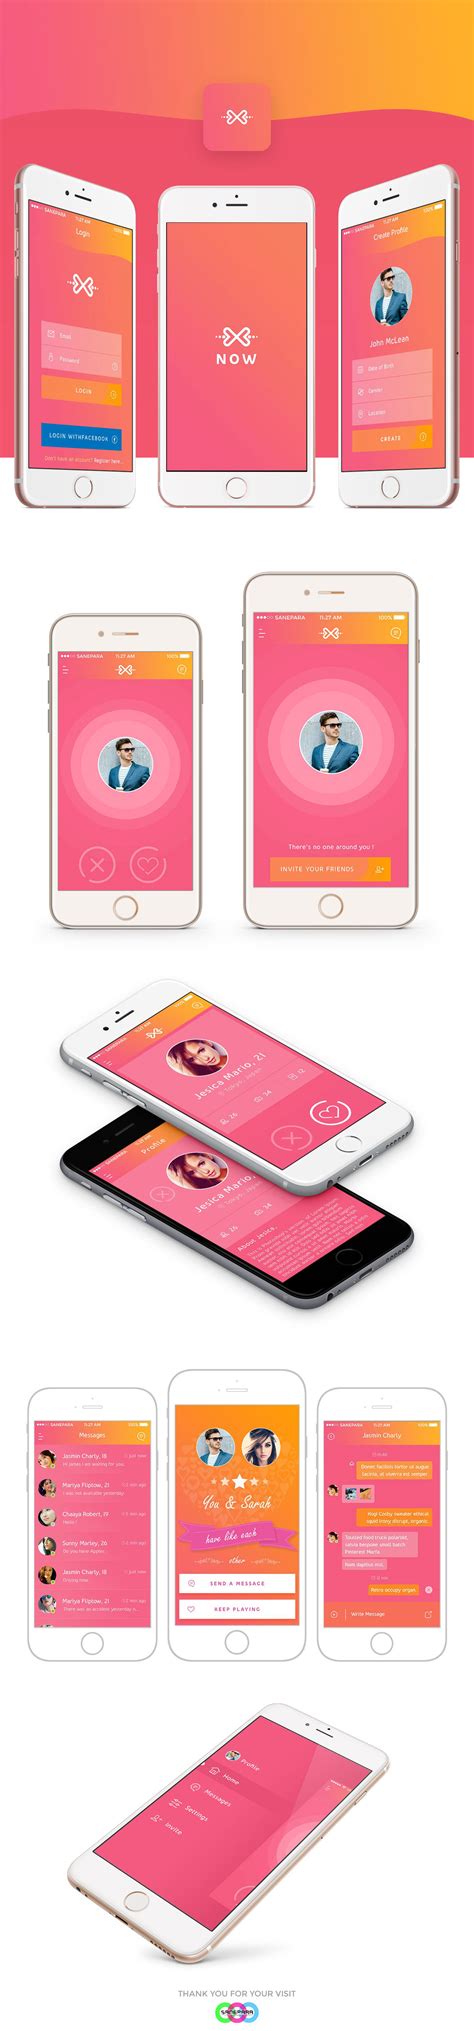 Perfect dating app for youngsters. Now Dating App Design on Behance | App design, Dating apps ...